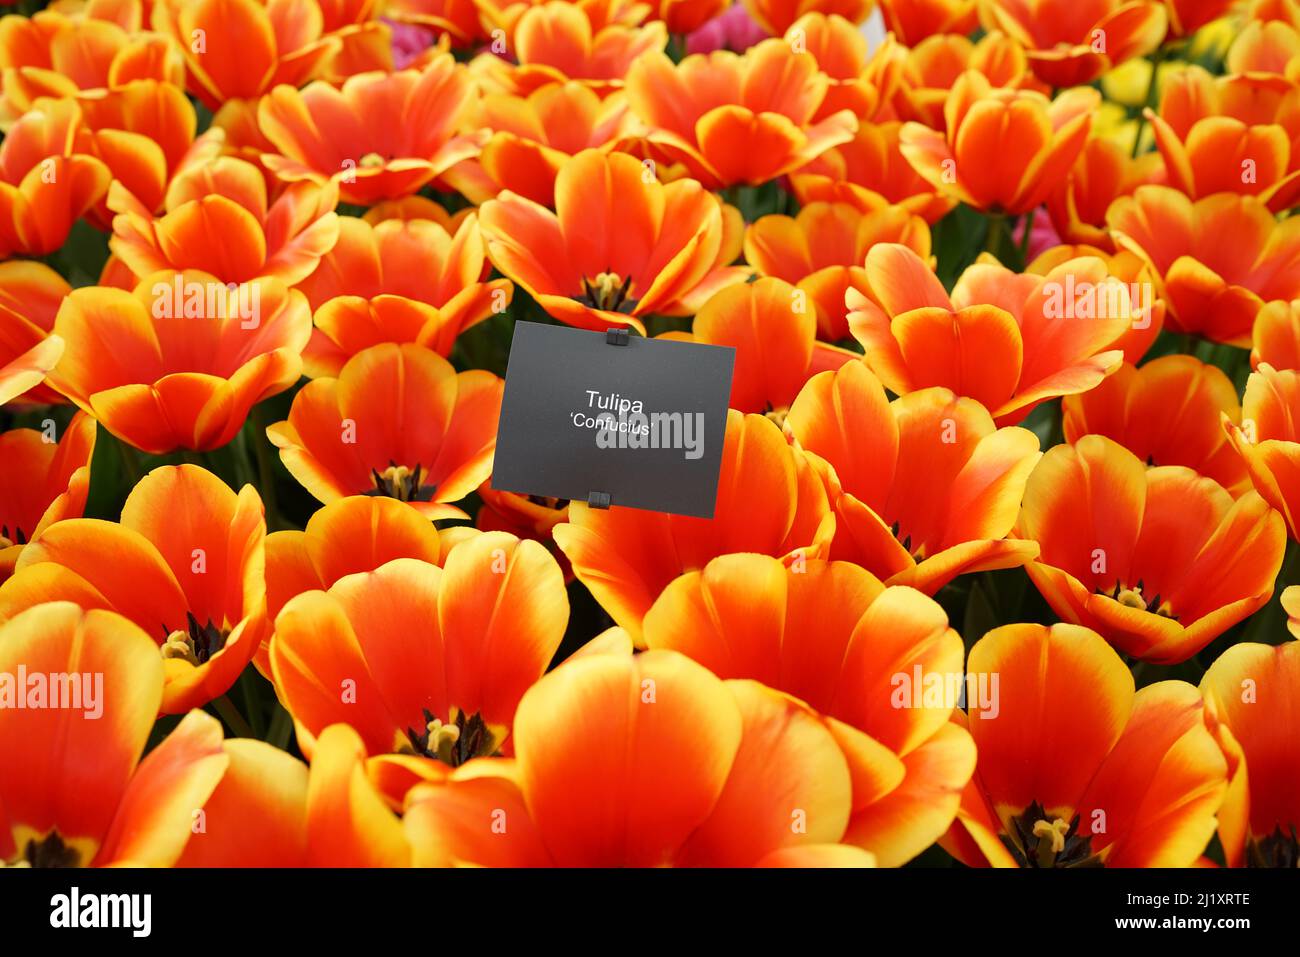 Fabulous yellow and red cultivated tulip named Confucius with its name-plate Stock Photo